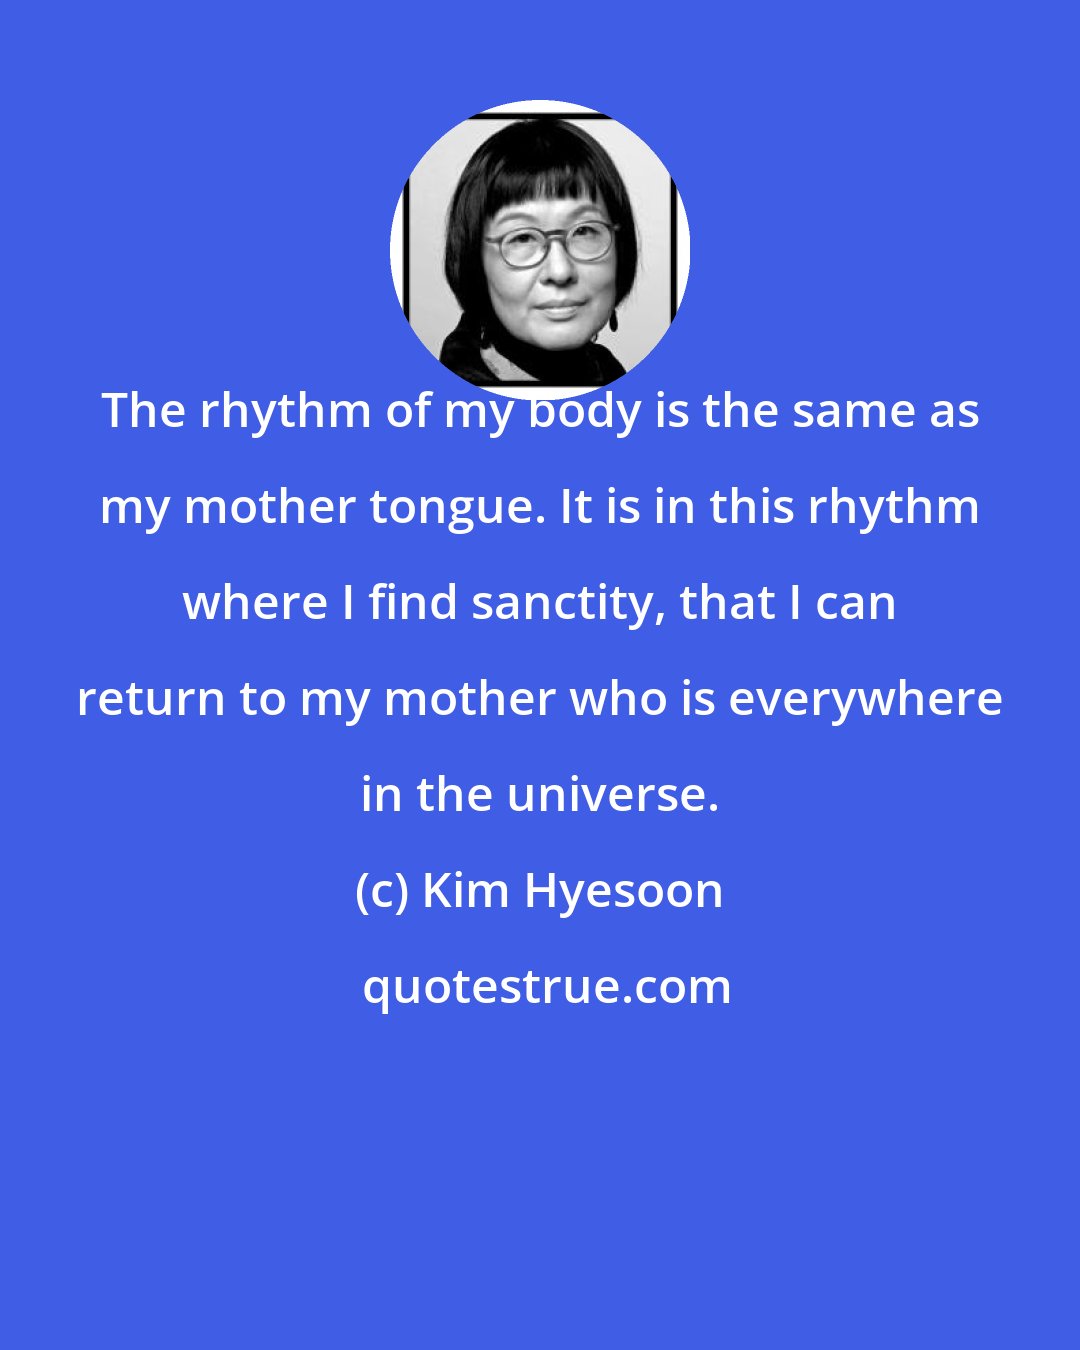 Kim Hyesoon: The rhythm of my body is the same as my mother tongue. It is in this rhythm where I find sanctity, that I can return to my mother who is everywhere in the universe.